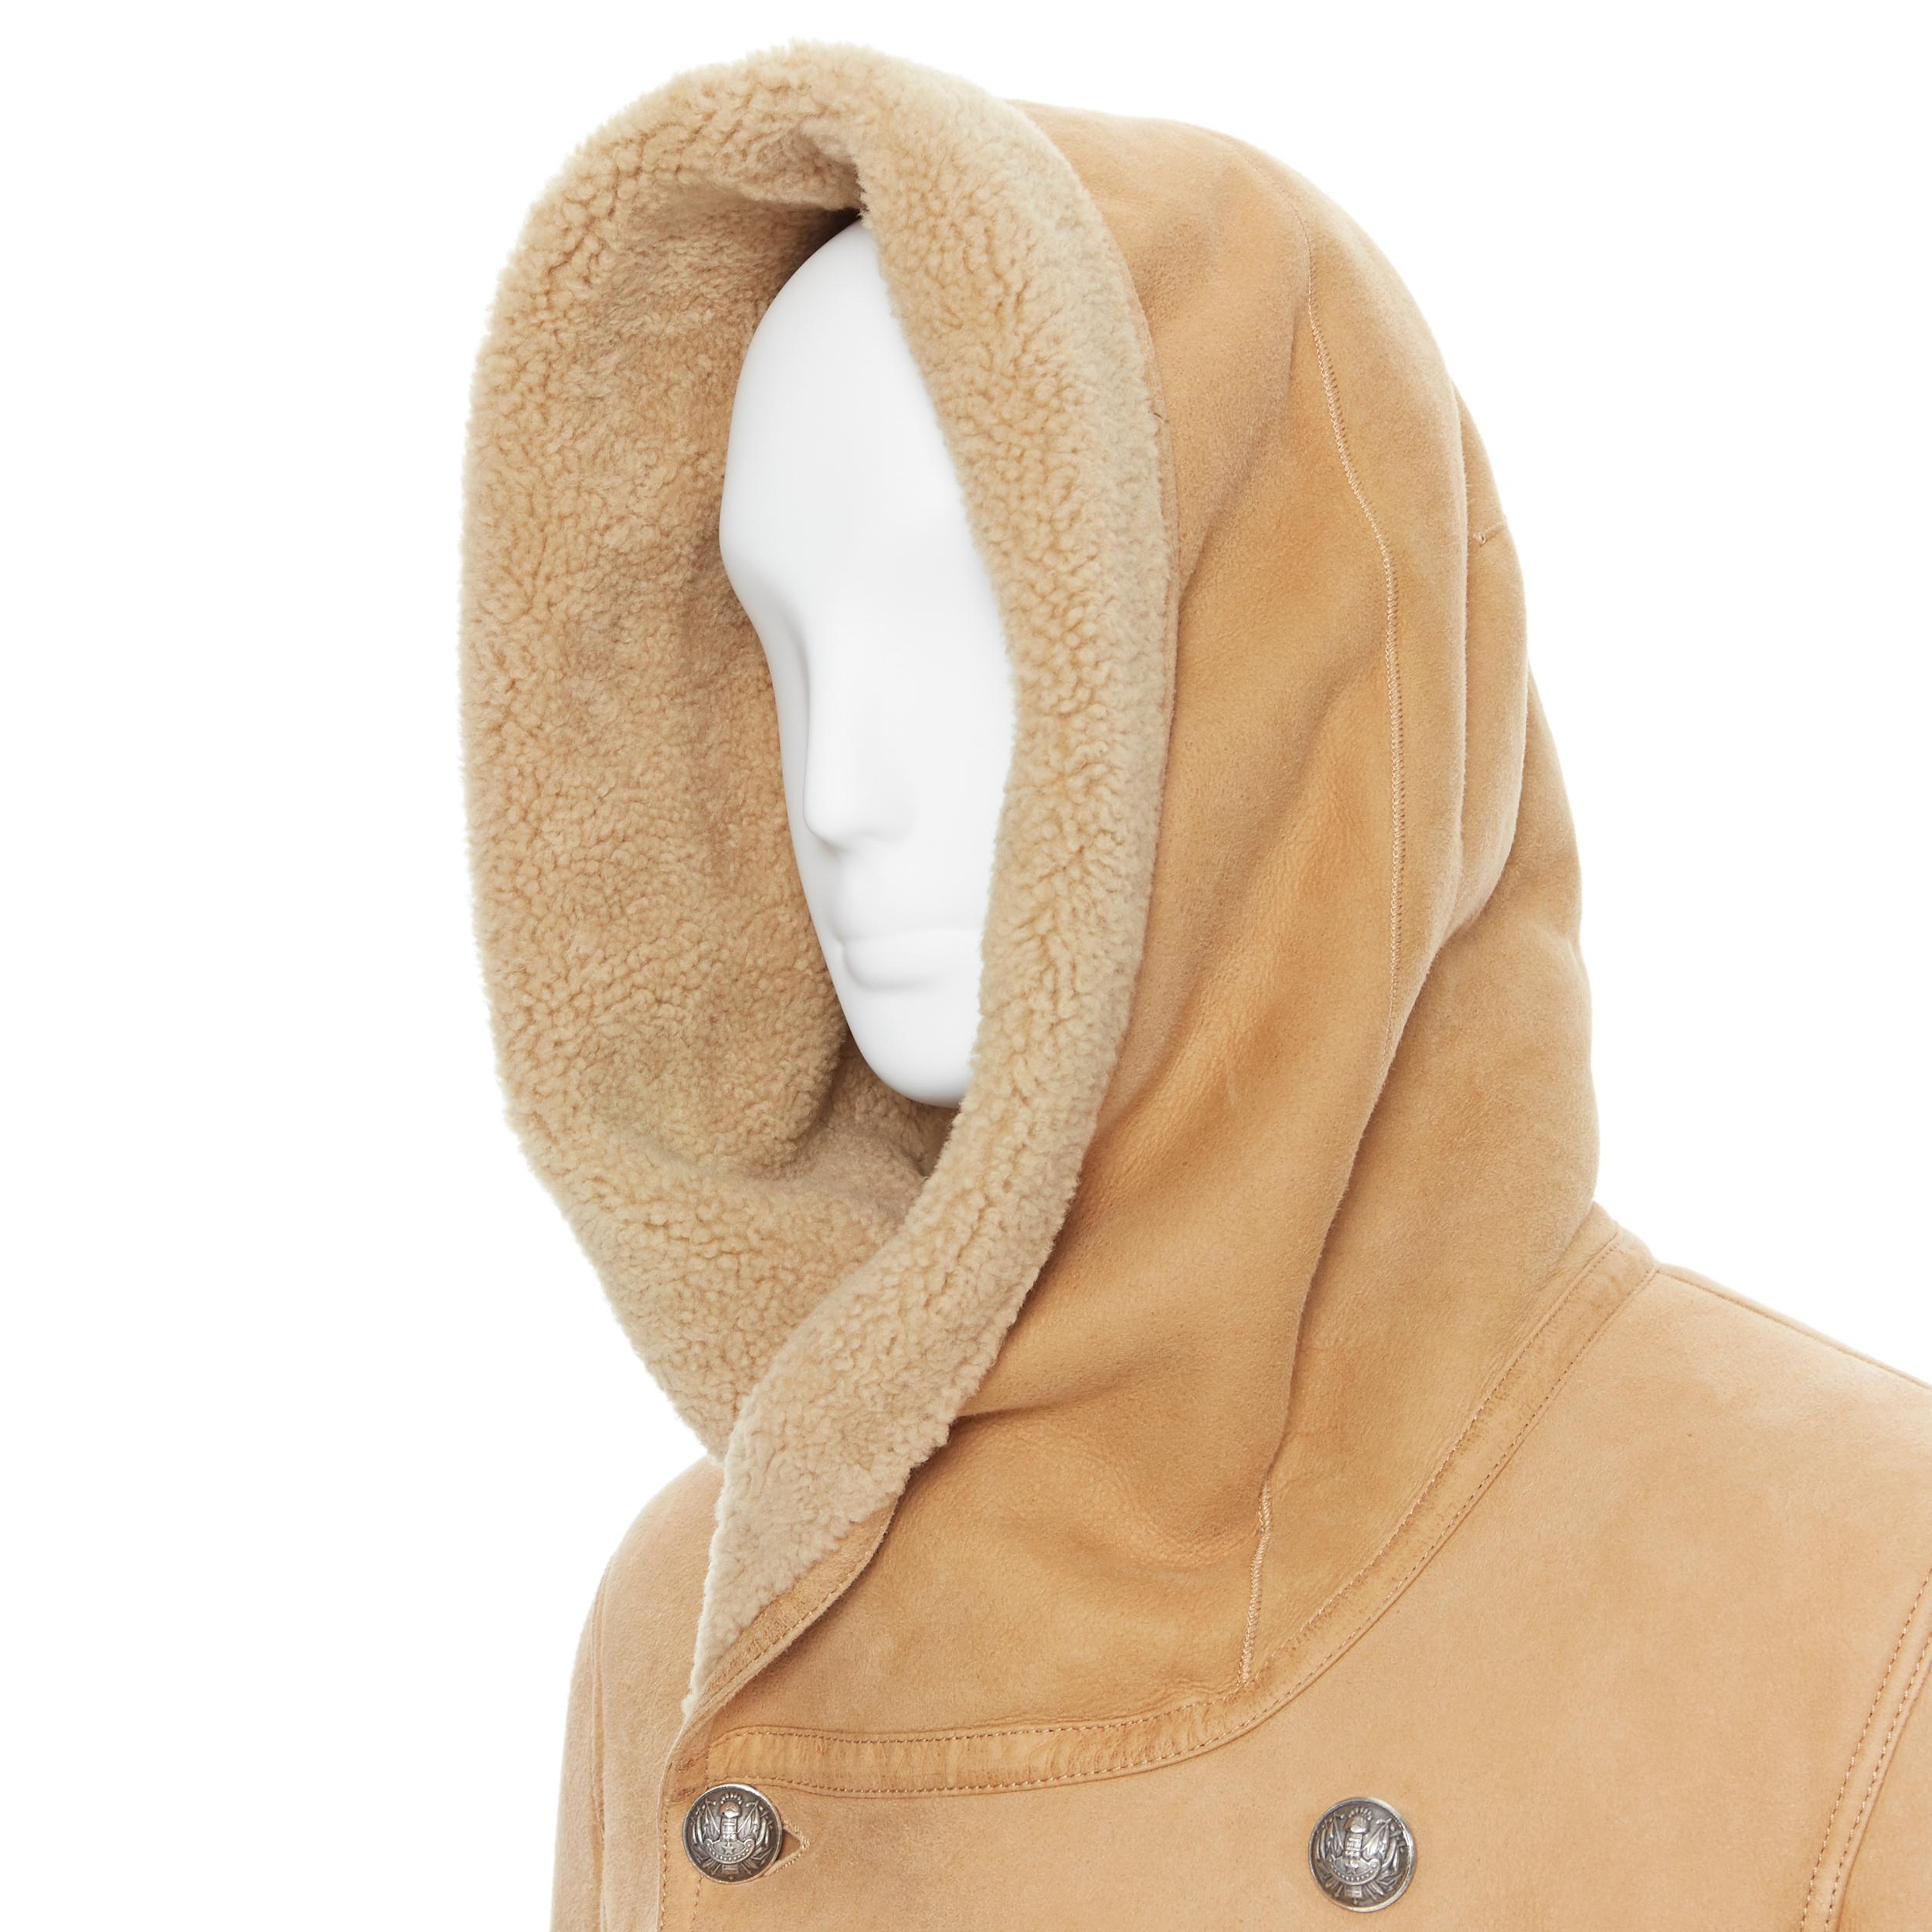 new BALMAIN tan brown  silver double breasted hooded shearling leather coat EU48
Brand: Balmain
Designer: Olivier Rousteing
Model Name / Style: Shearling coat
Material: Other; 100% Shearling
Color: Brown
Pattern: Solid
Closure: Button
Extra Detail: